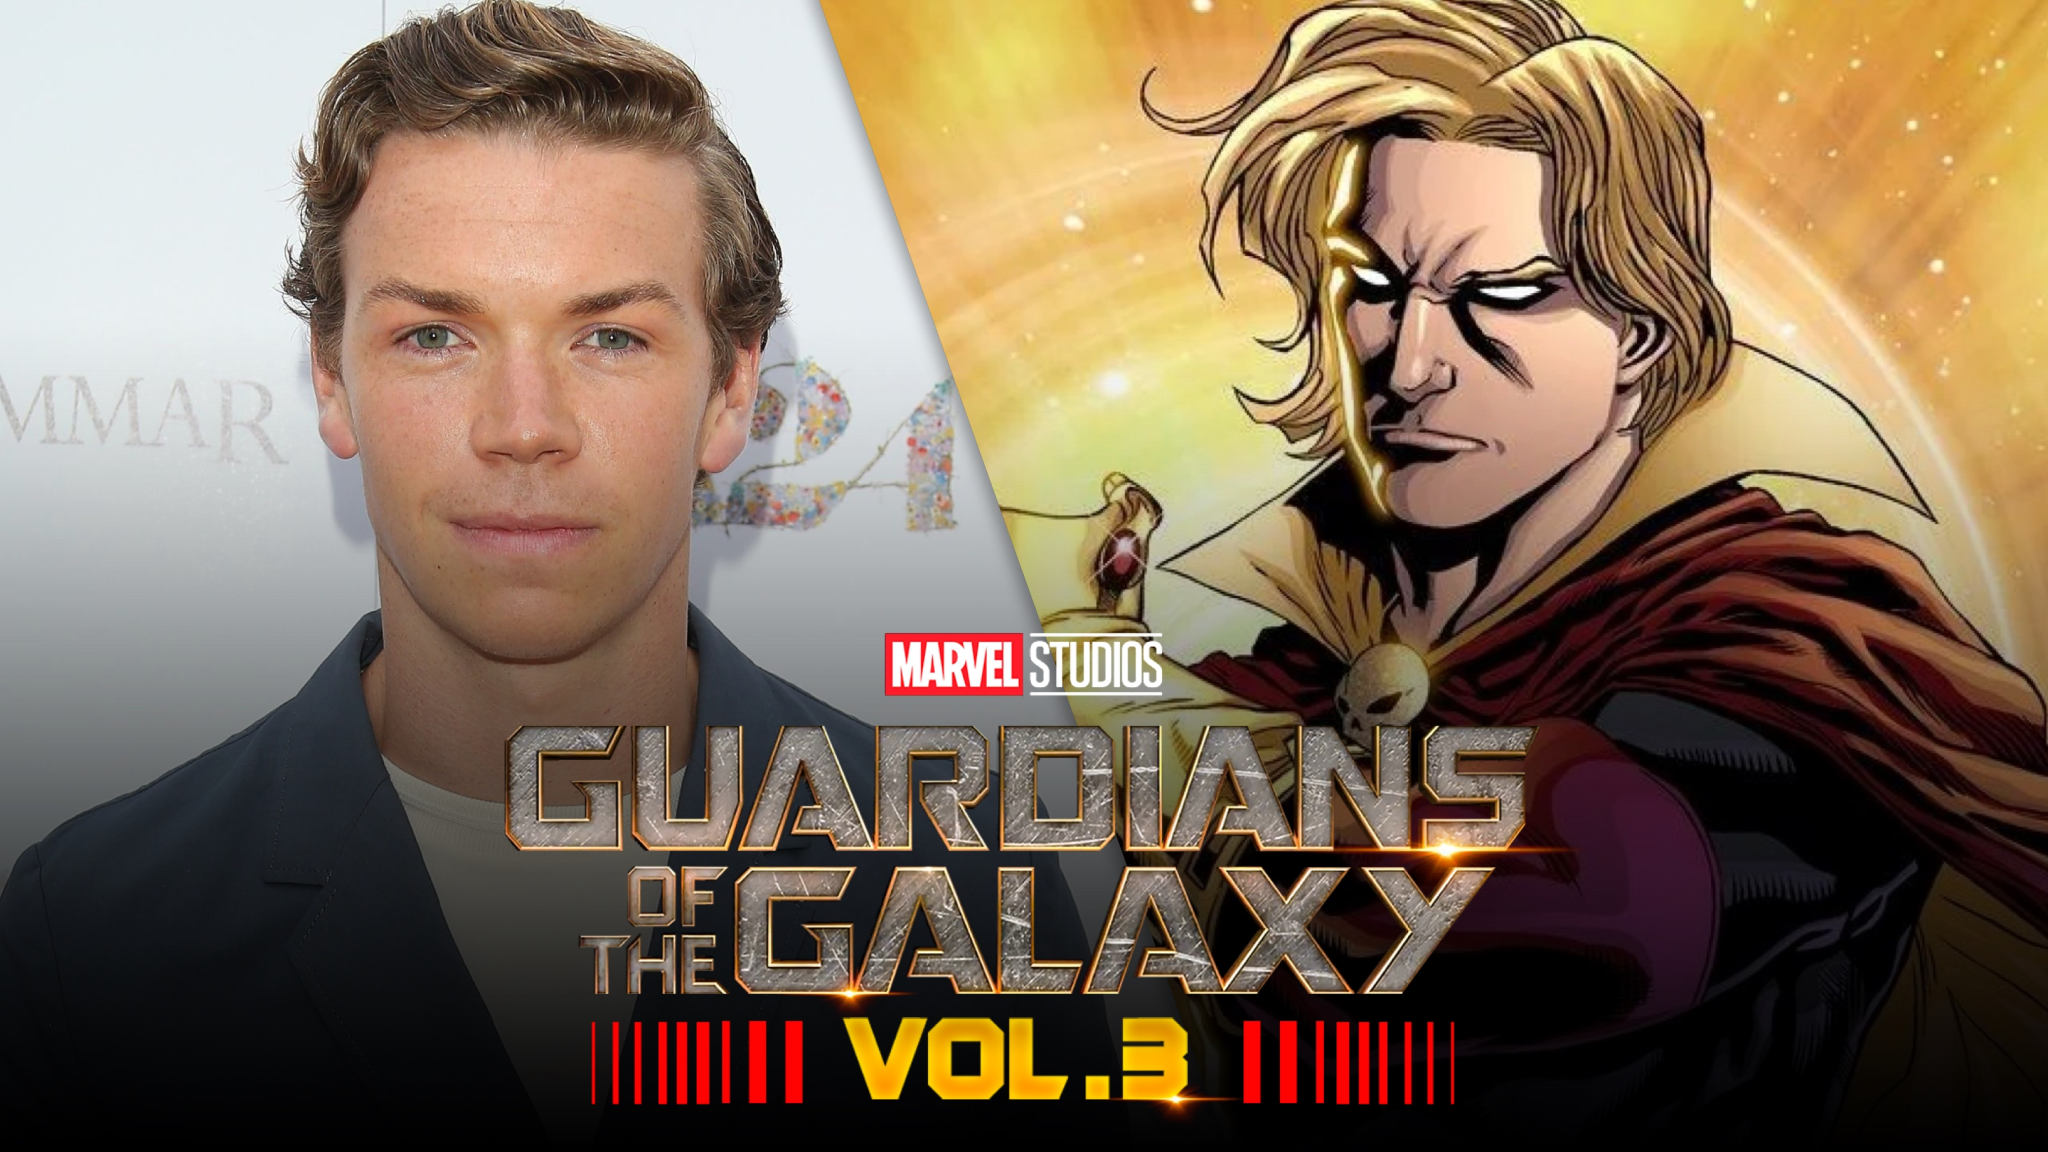 Will Poulter Discusses Plans For Adam Warlock After ‘Guardians of the Galaxy’, A Potential Return To Narnia, and Much More!